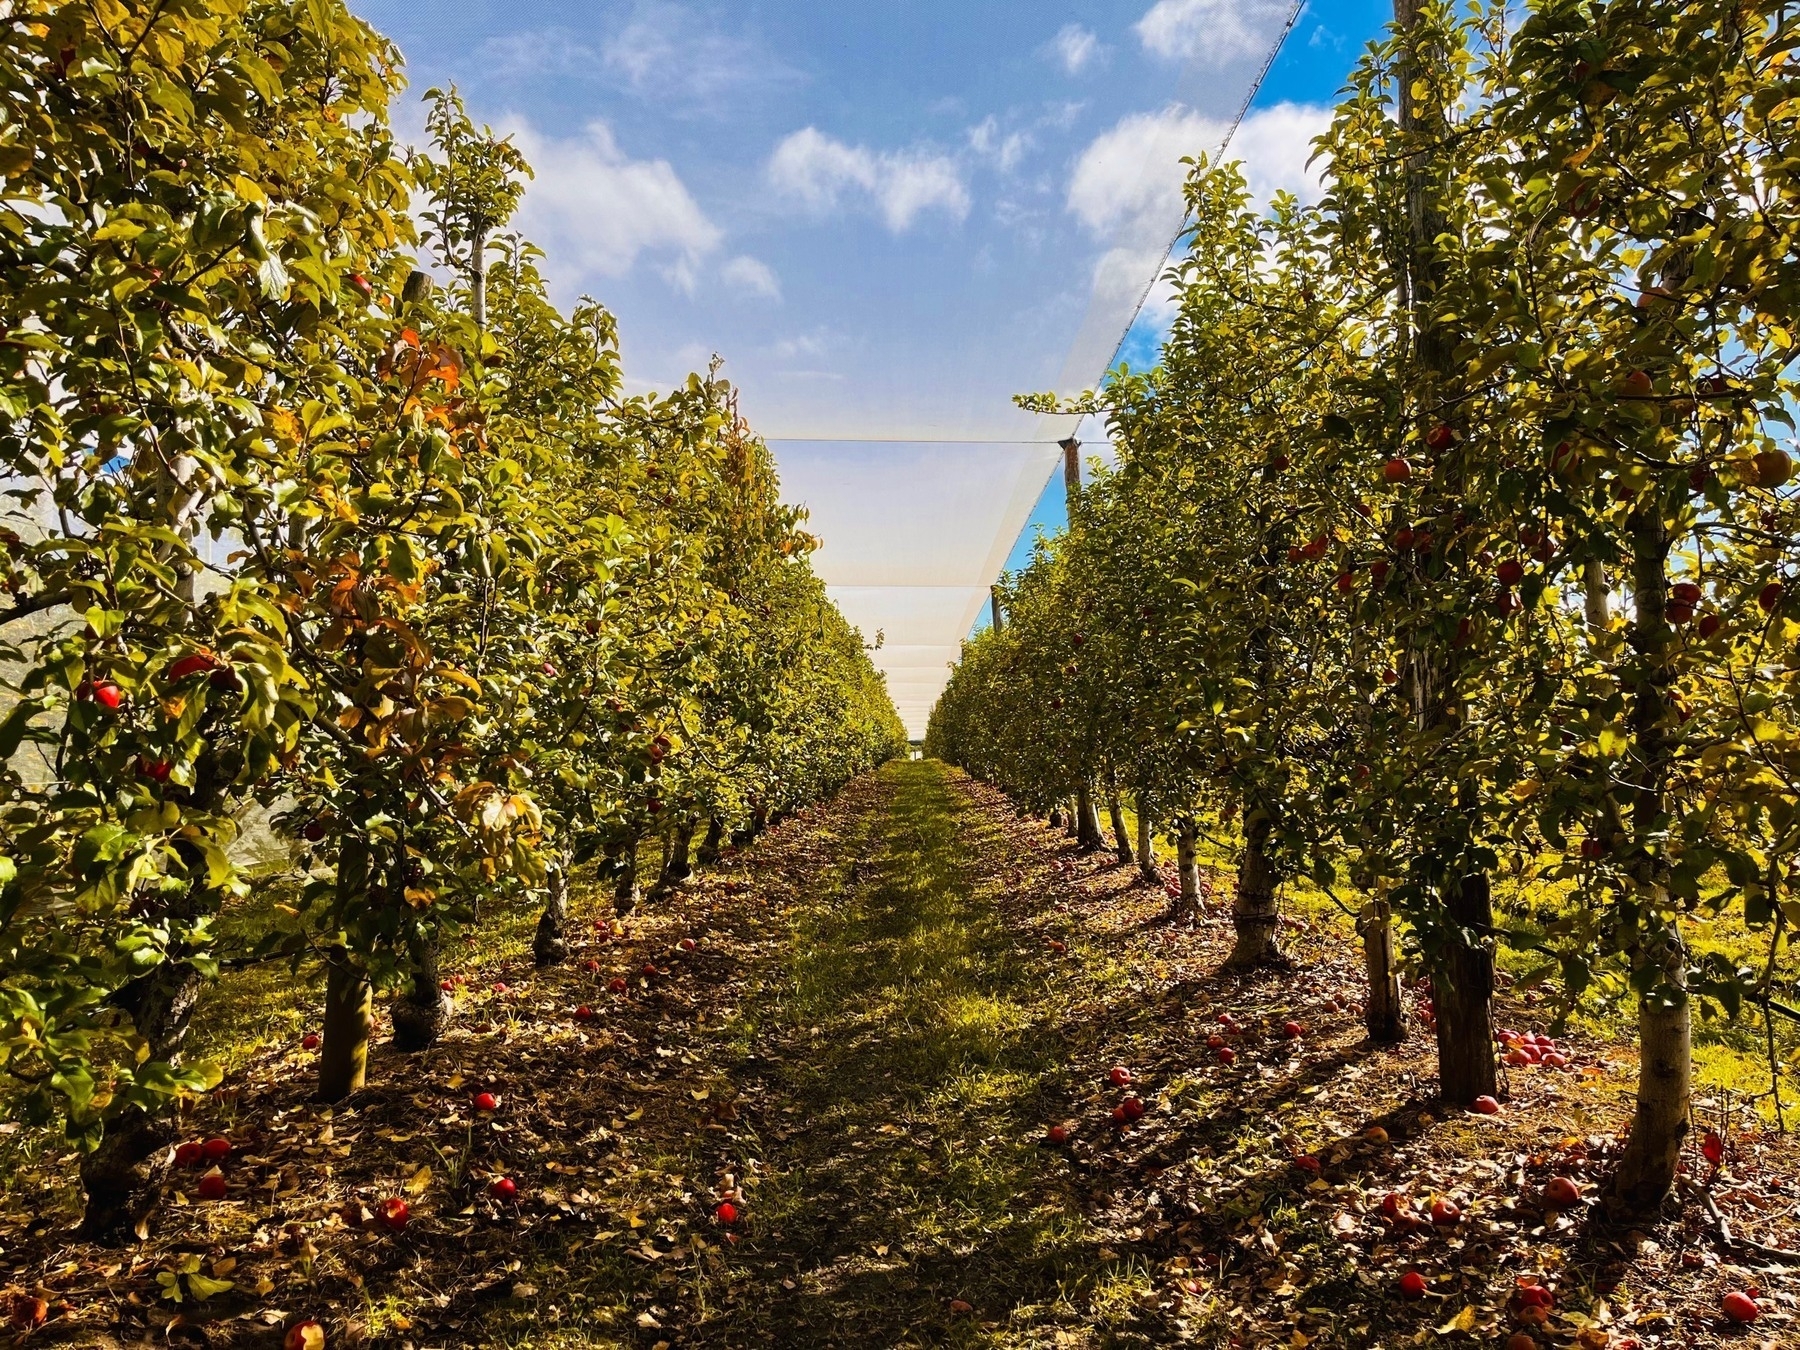 Rows of apple trees at an orchard